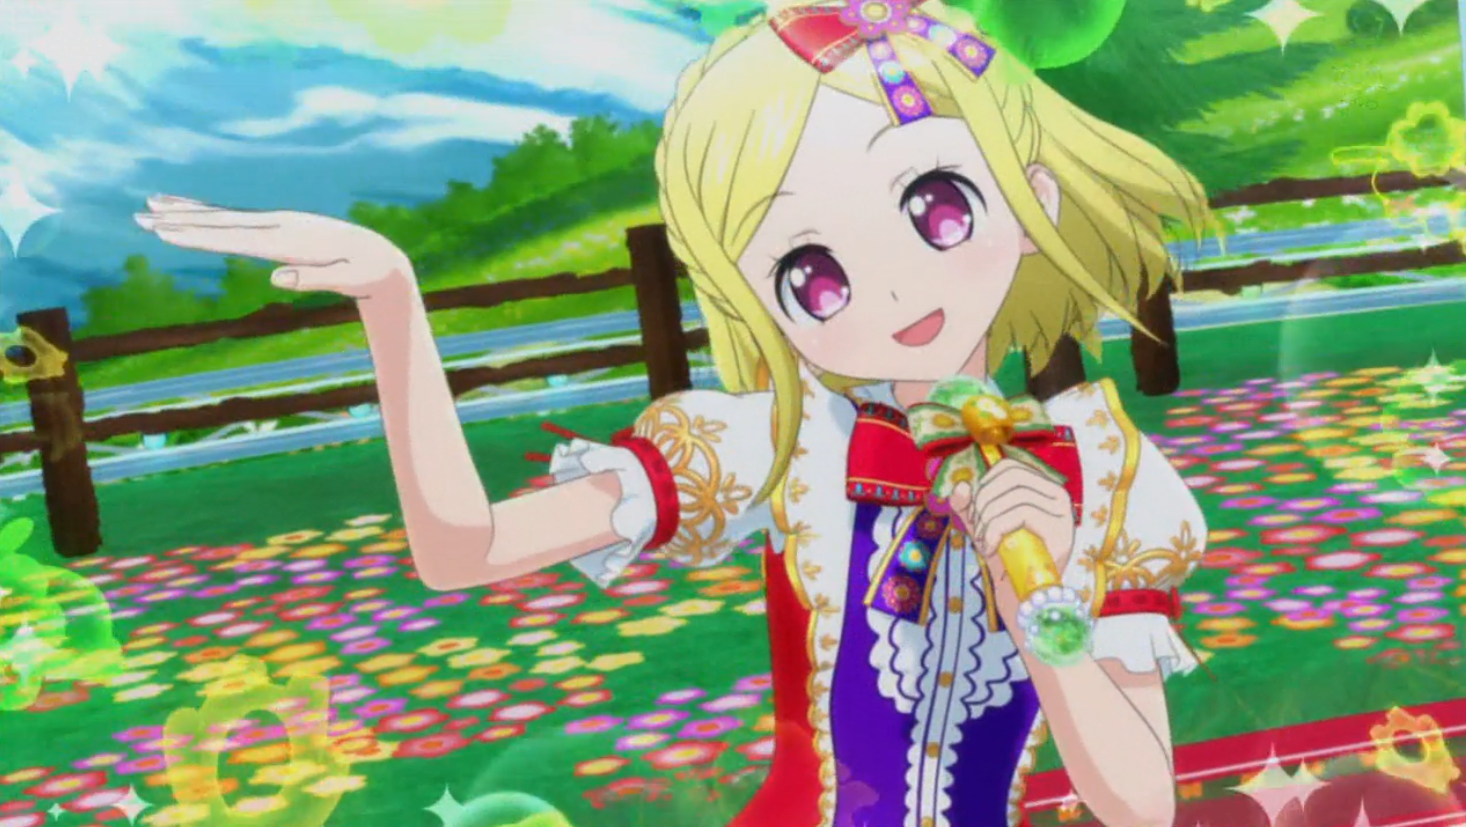 Come and Join This Song-Hee-Hoo | PriPara Wiki | Fandom